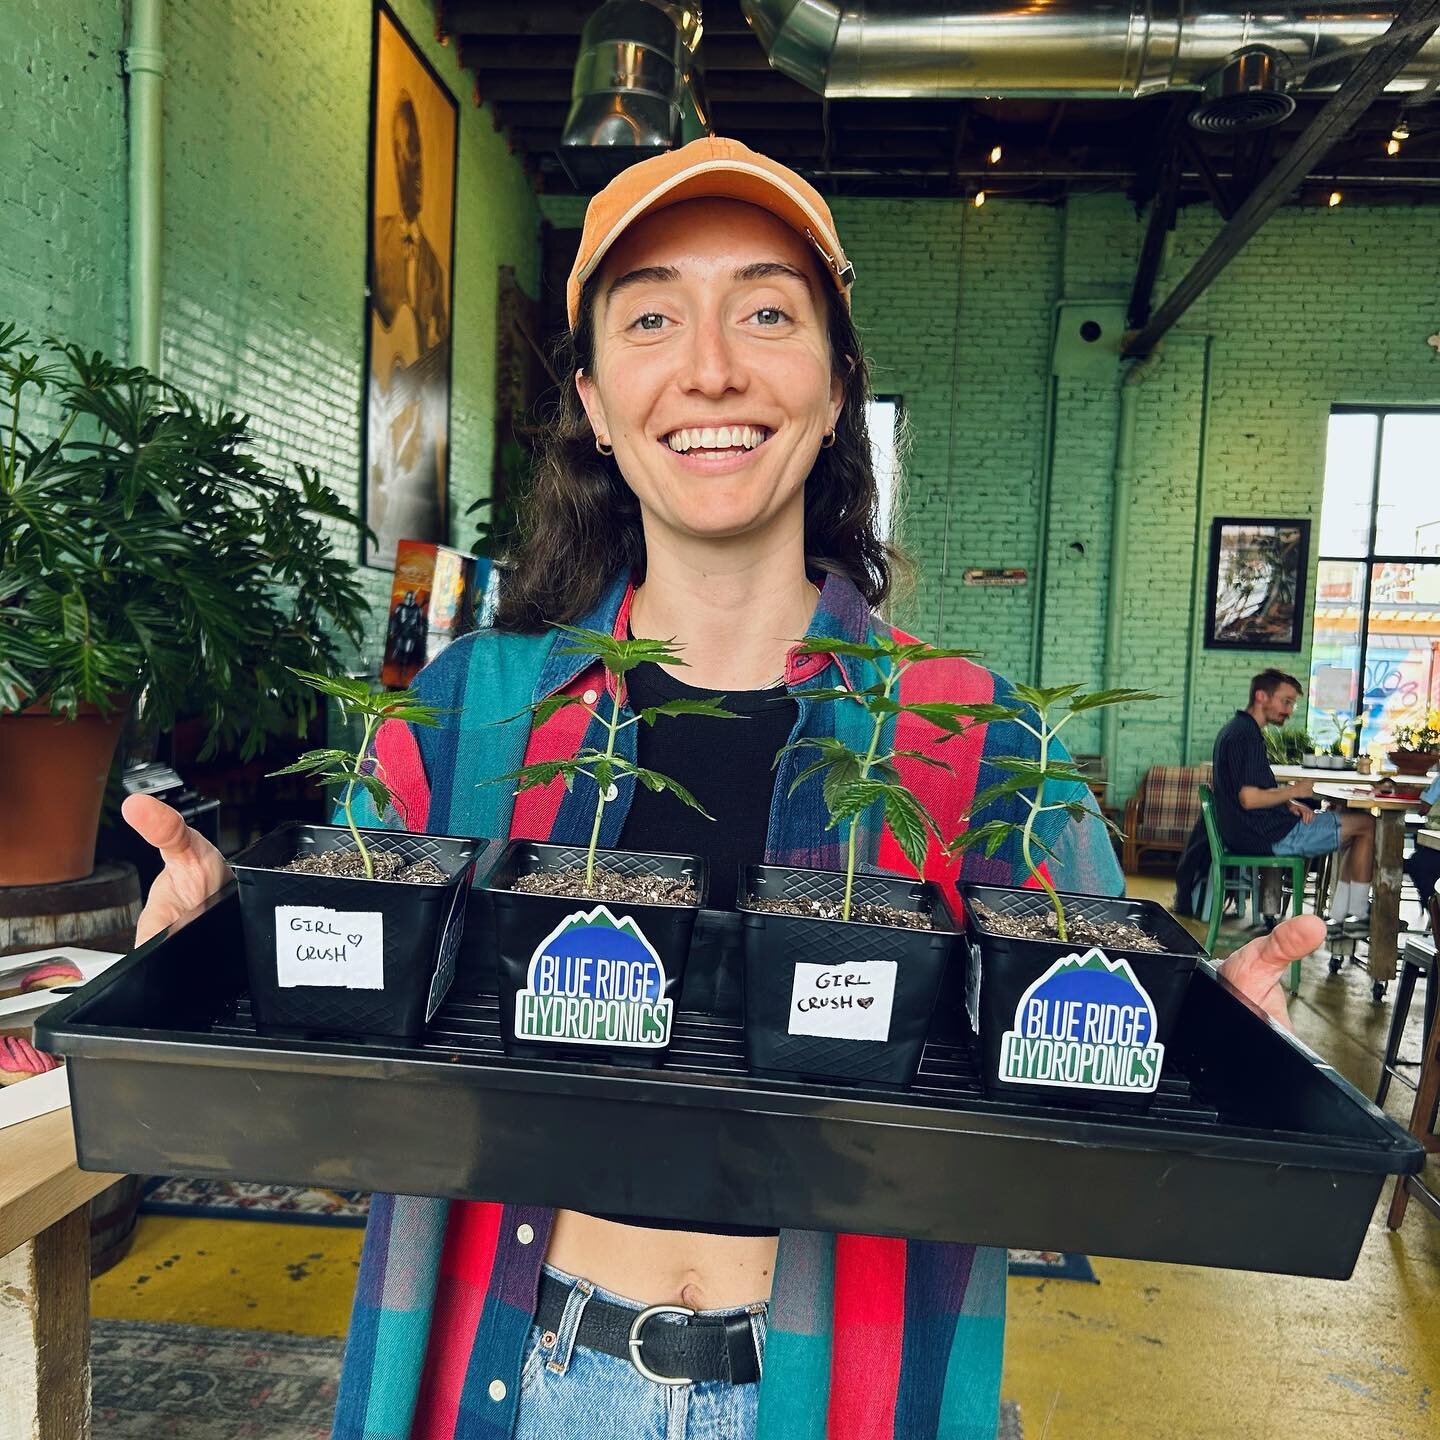 Hand-delivered prizes for @gatewoodrosebotanicals Golden Girls Bingo tonight @ @goldencactusbrewing 💚 

Nothin like a good ol&rsquo; Girl Crush clone!

Fun Fact: Girl Crush has been entered by a local grower in our BRH Cannabis Cup 😎 that&rsquo;s w